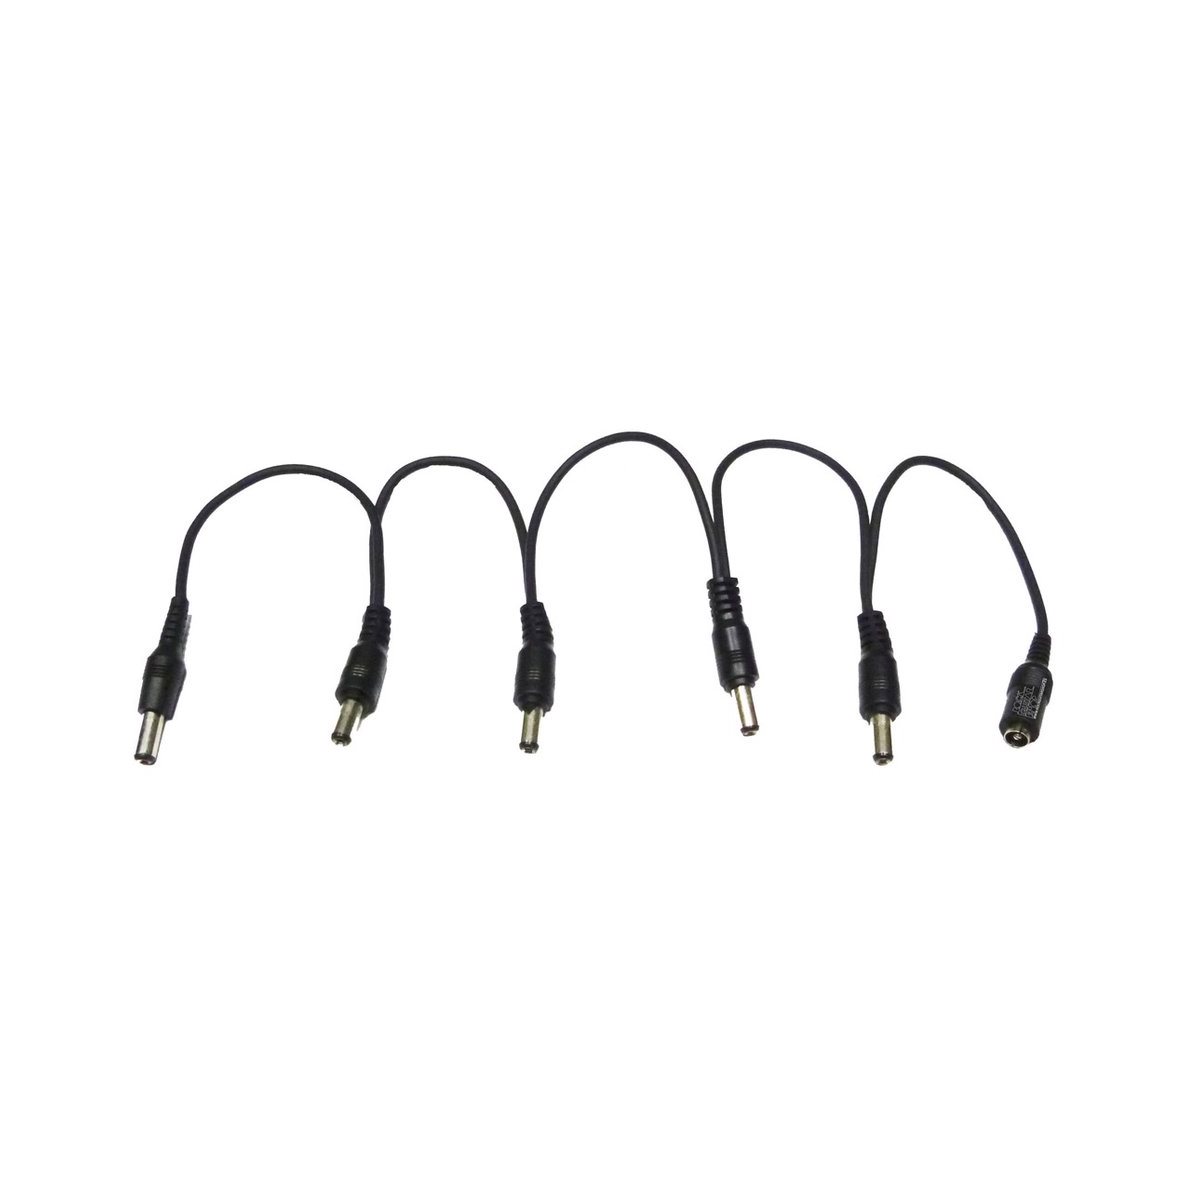 LEEM - CD 6 - DAISY CHAIN POWER CABLE FOR 5 PEDALS